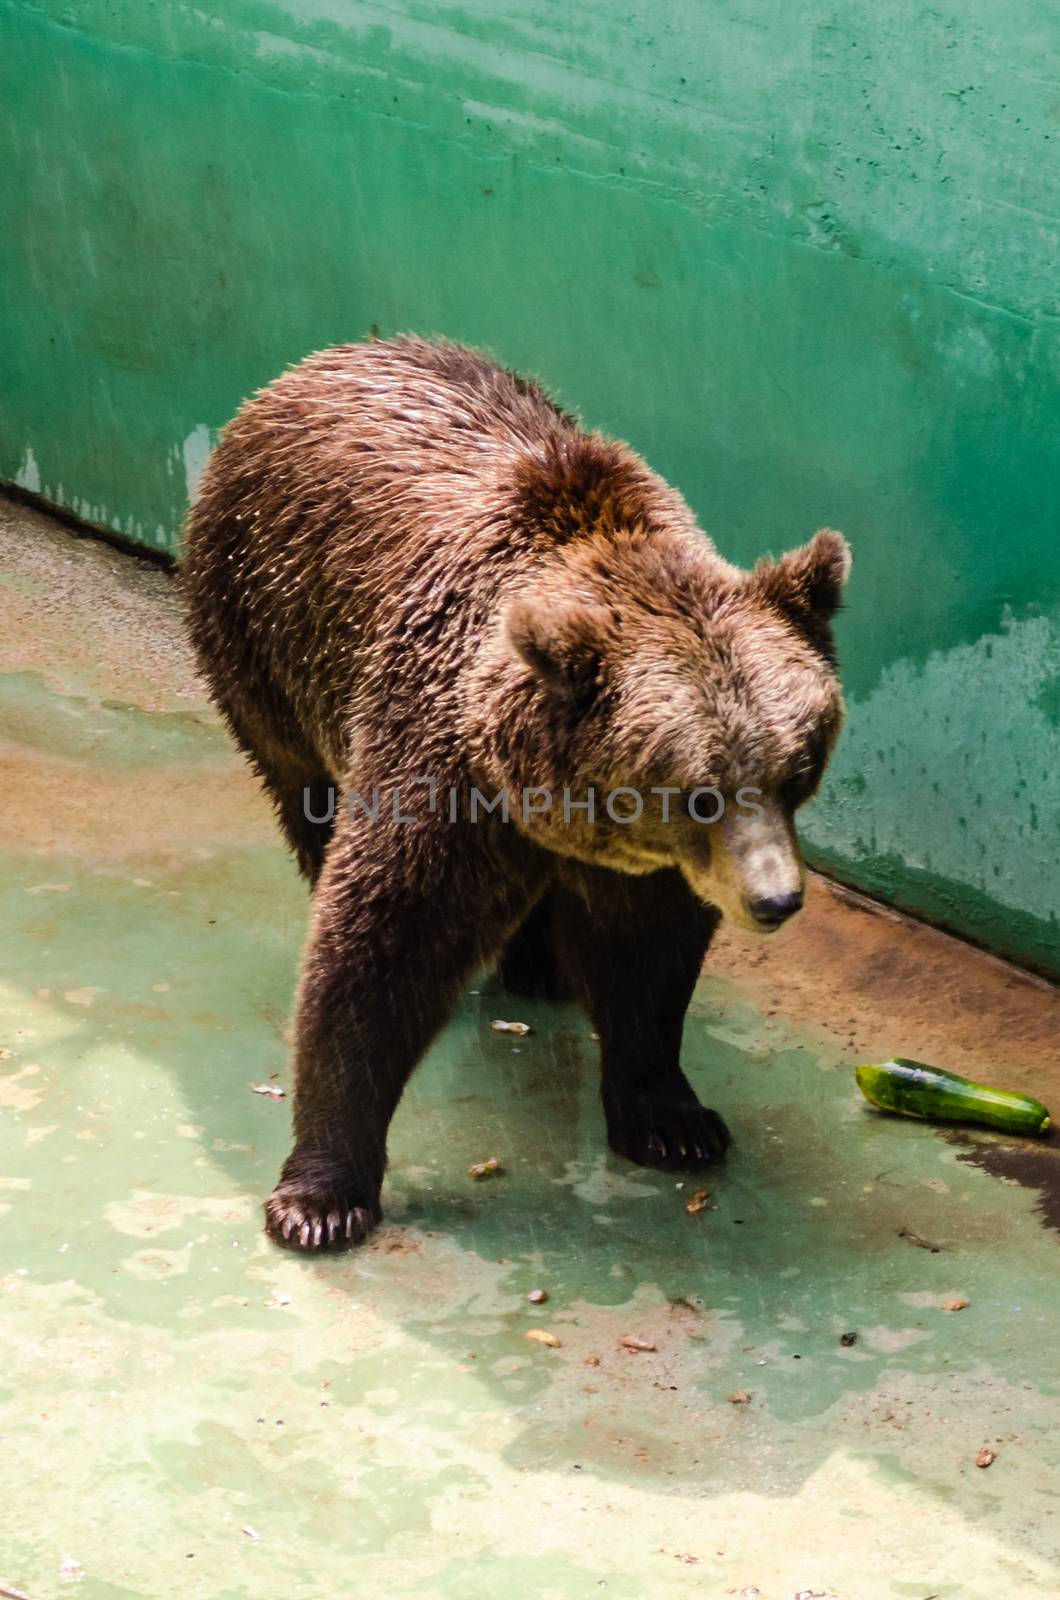 Brown bear waiting for food at the zoo